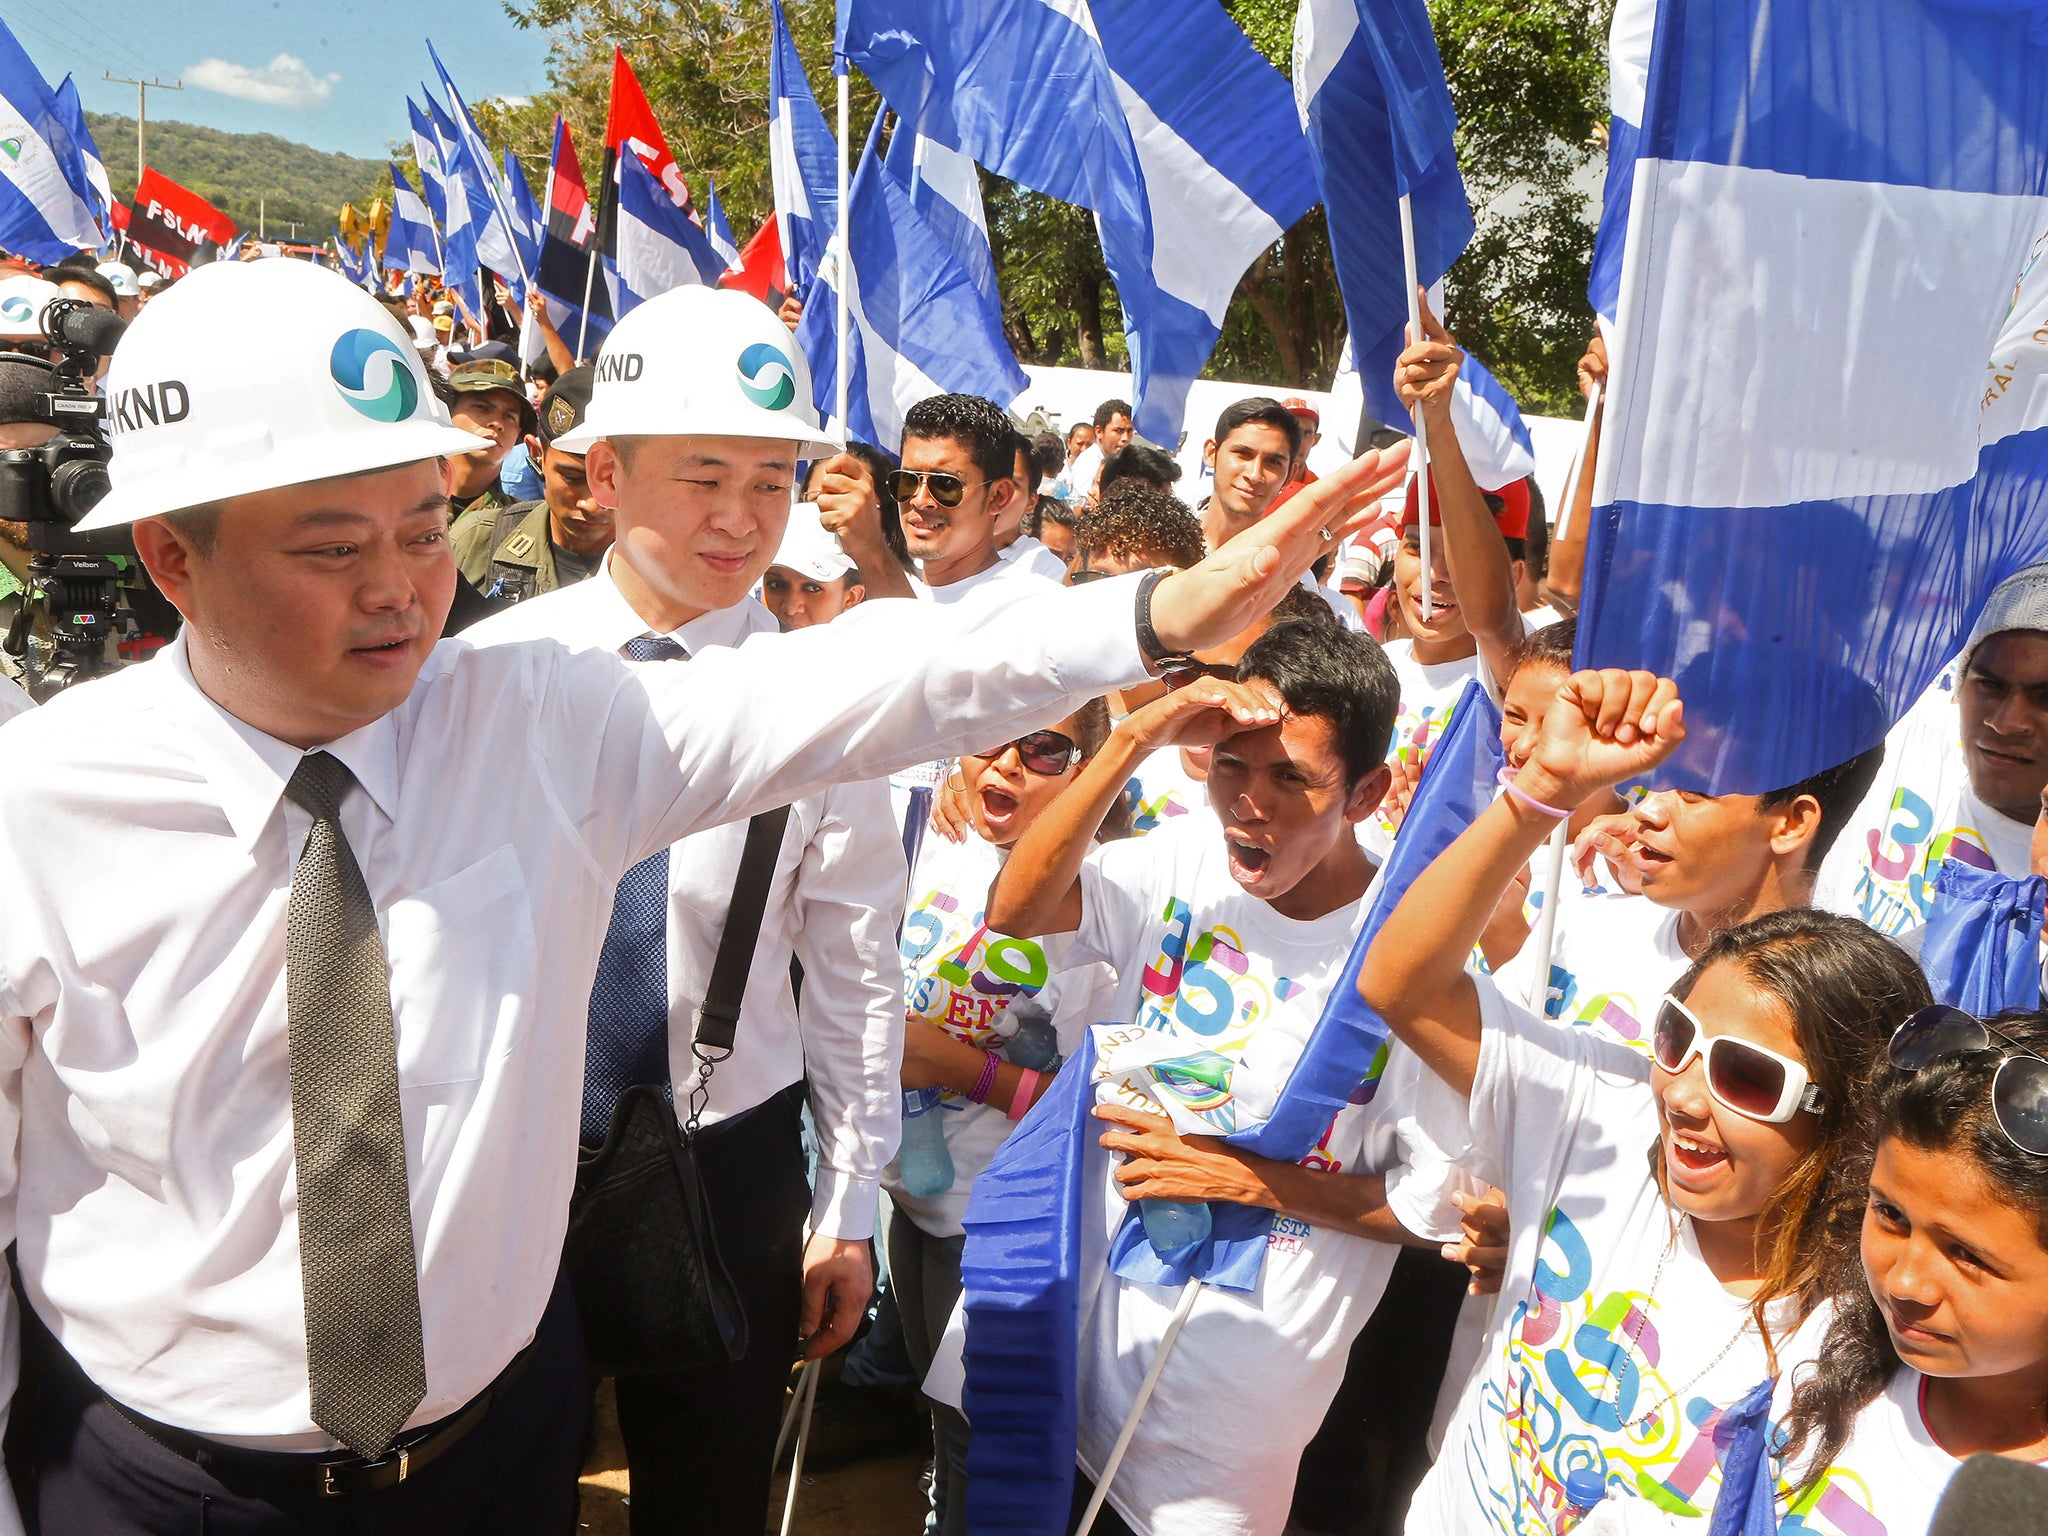 Chinese businessman Wang Jing (left) greets members of the Sandinista National Liberation Front during the inauguration of the works of an inter-oceanic canal in Tola, some 3 km from Rivas, Nicaragua, in December 2014